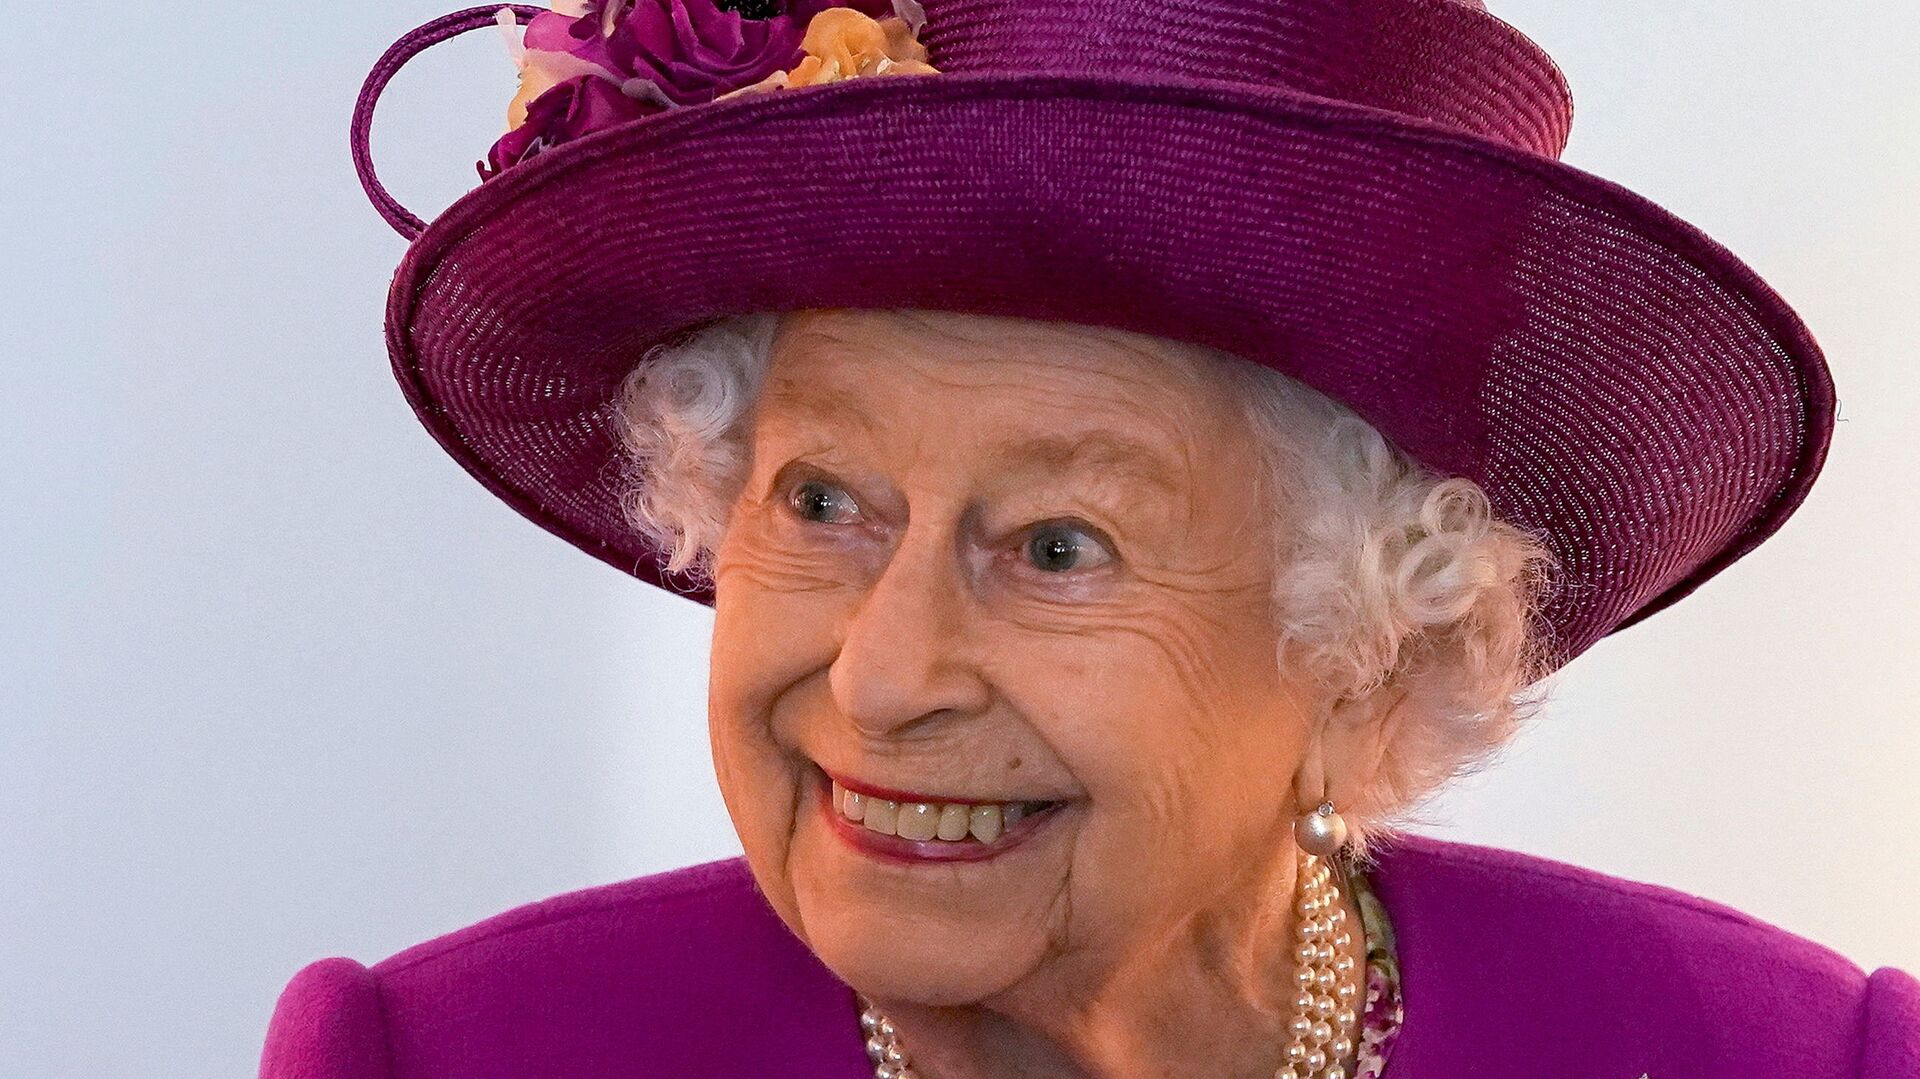 Britain's Queen Elizabeth views exhibits in the renovated Argyll and Sutherland Highlanders Museum at Stirling Castle as part of her traditional trip to Scotland for Holyrood Week, in Stirling, Scotland, Britain June 29, 2021 - Sputnik International, 1920, 09.10.2021